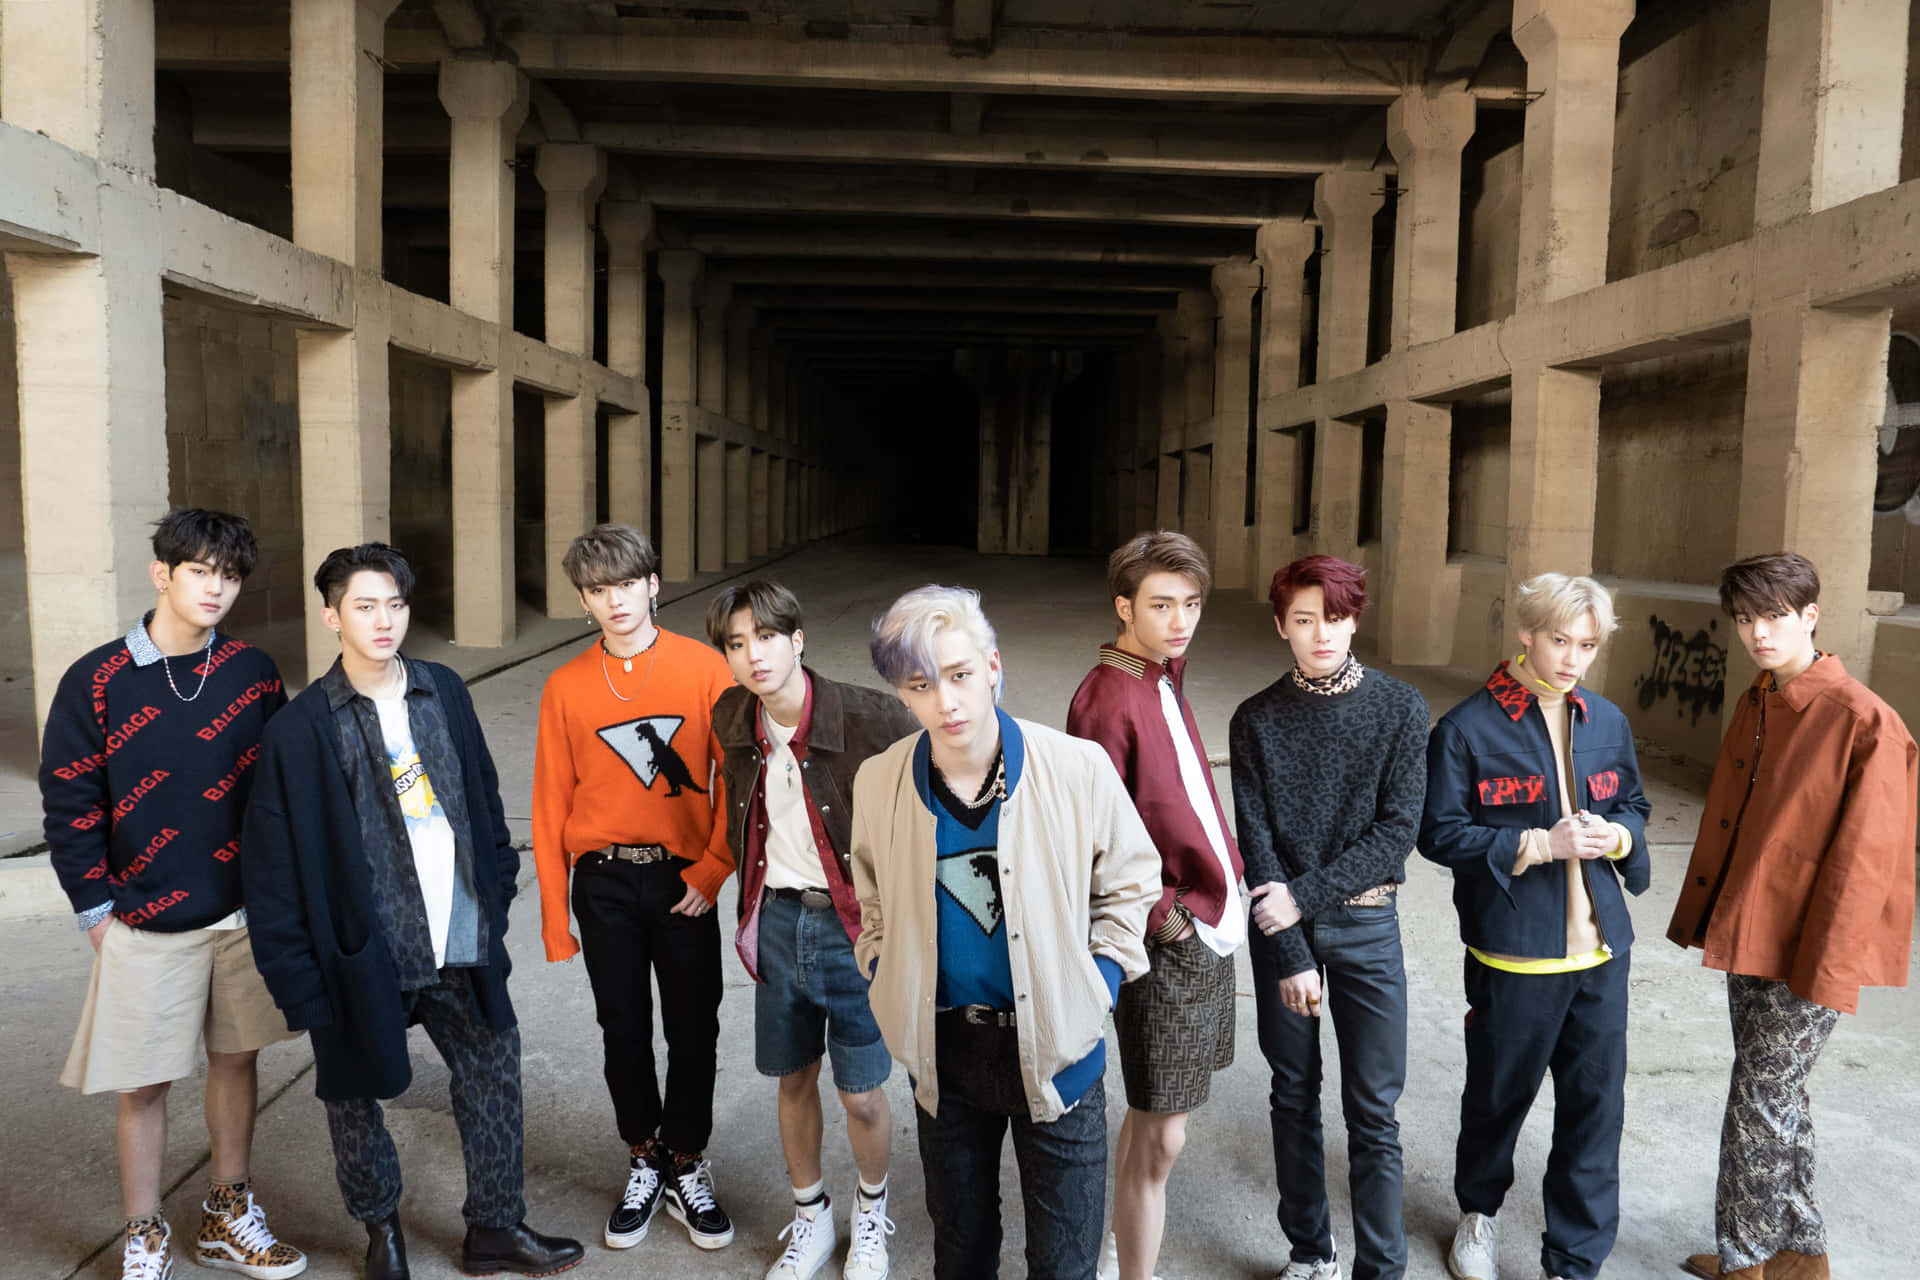 Stray Kids Group Photo Industrial Backdrop Wallpaper